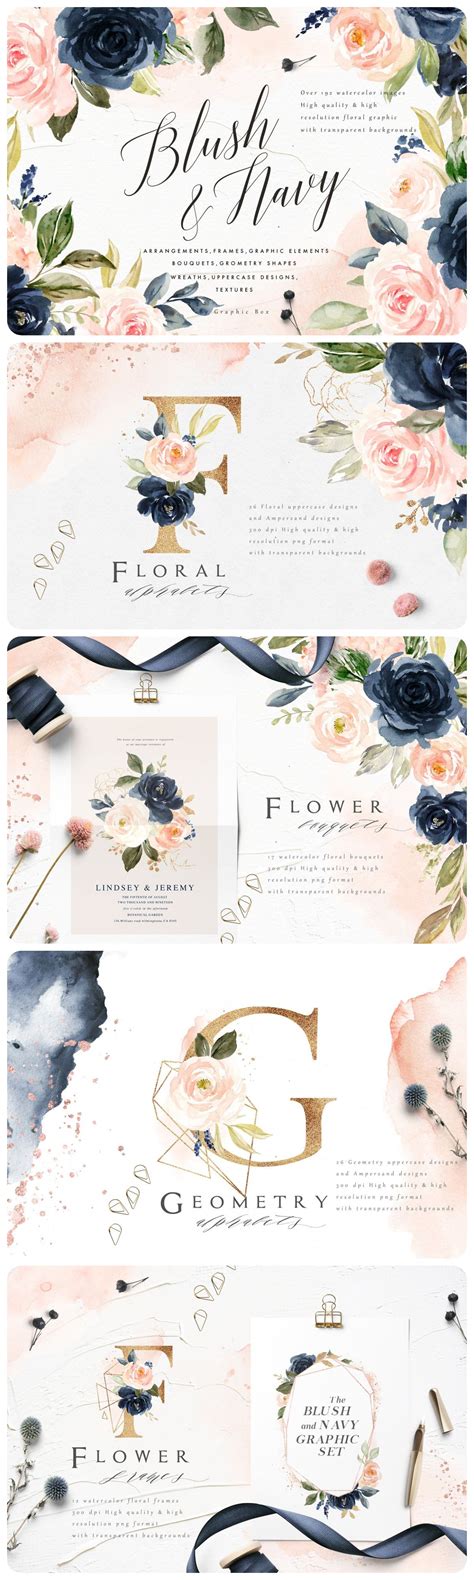 Blush And Navy Watercolor Graphic Set Watercolor Graphic Ink Splatter